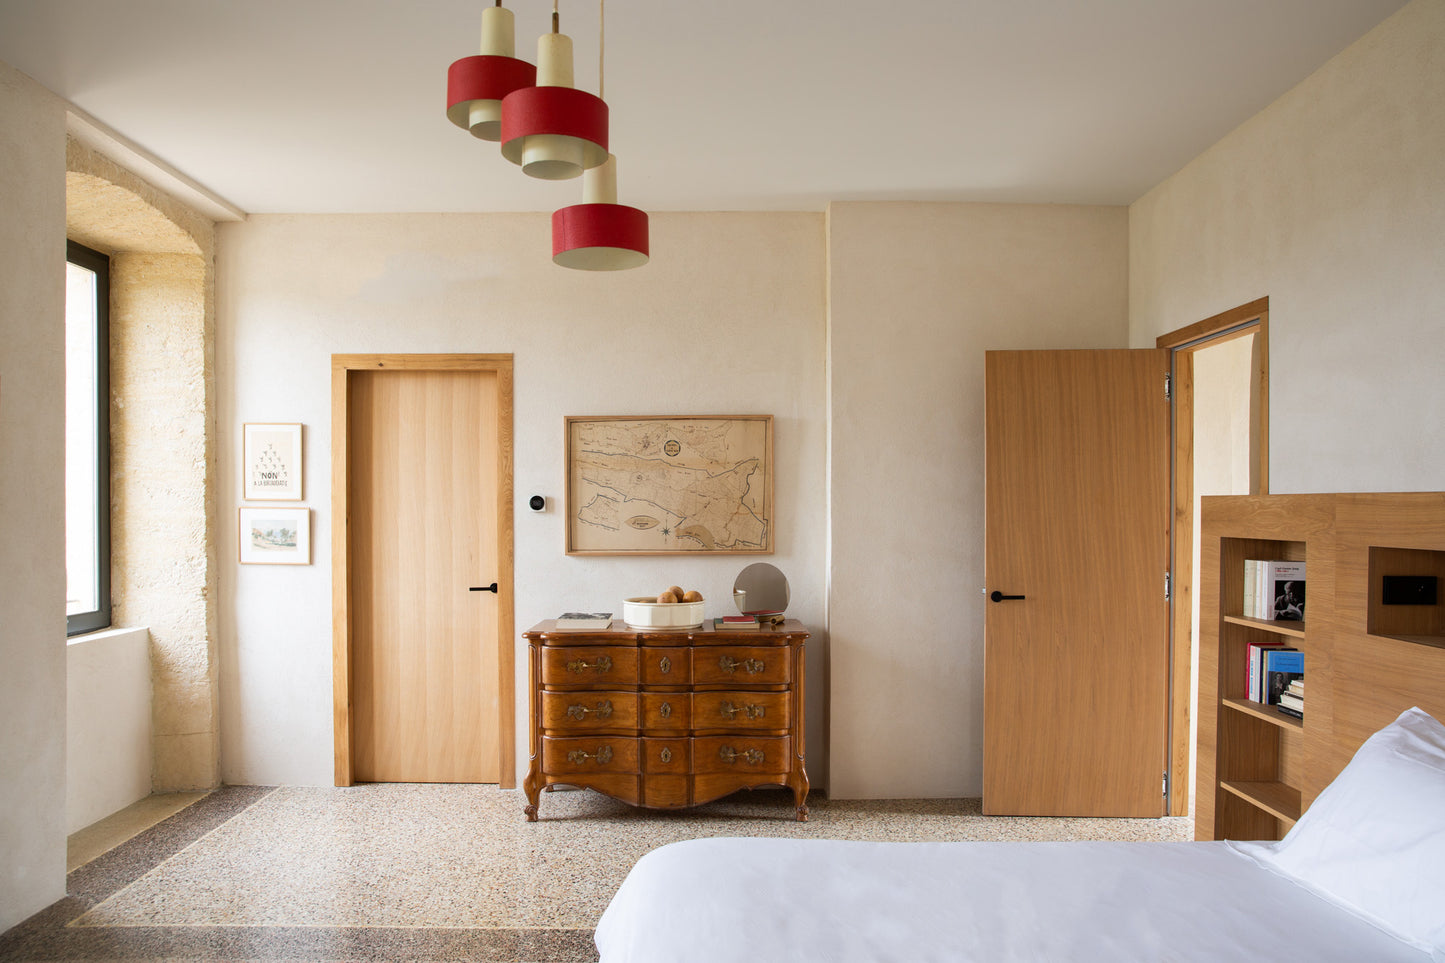 PREMIUM FAMILY SUITE WITH 2 BEDROOMS GARDEN VIEW: CLOISTER N°3